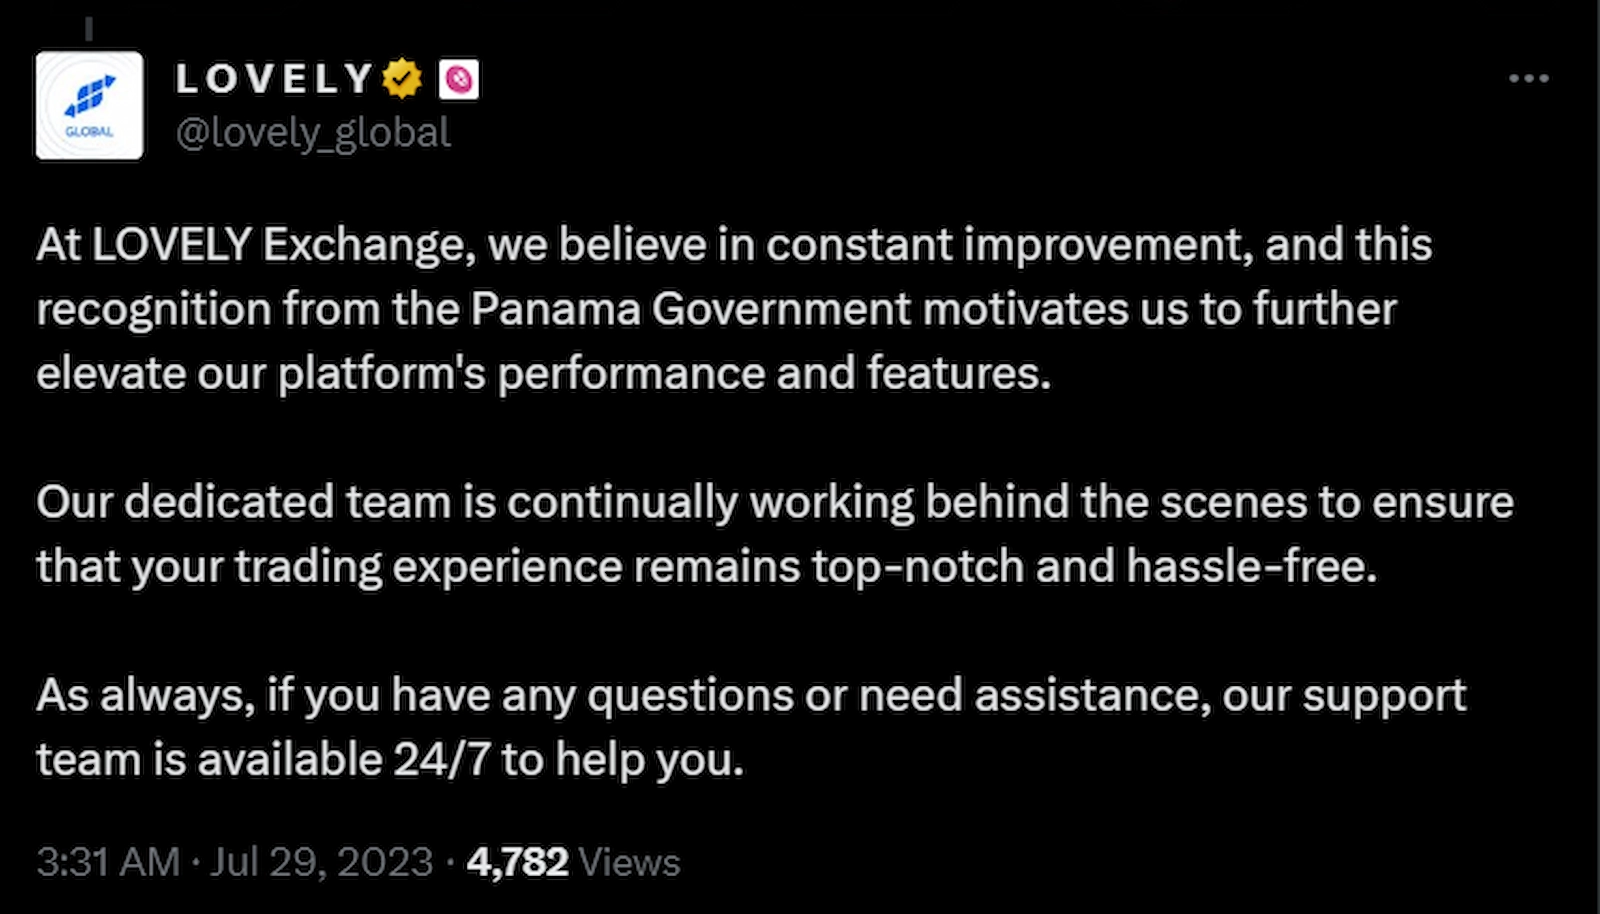 Lovely Exchange shared news of achieving legal status from the Panama government in an X post